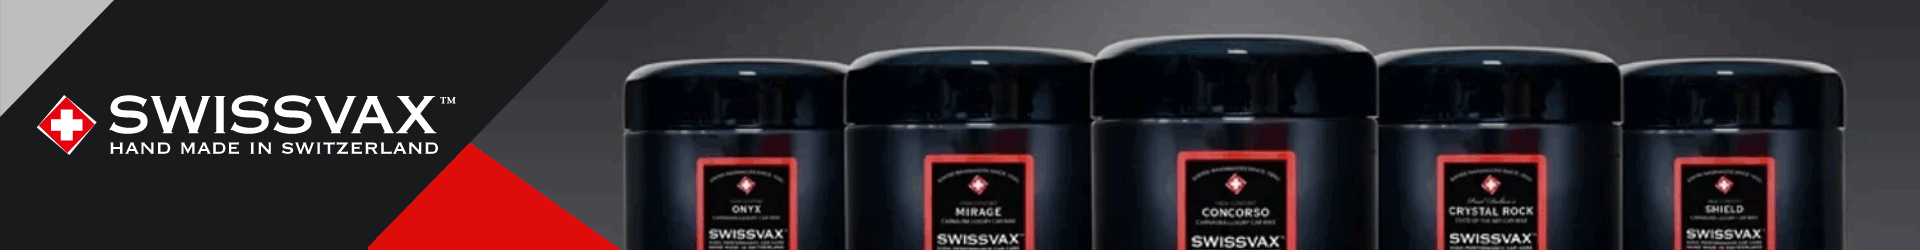 Swissvax UK - The Ultimate Car Care Products Hand-Made In Switzerland